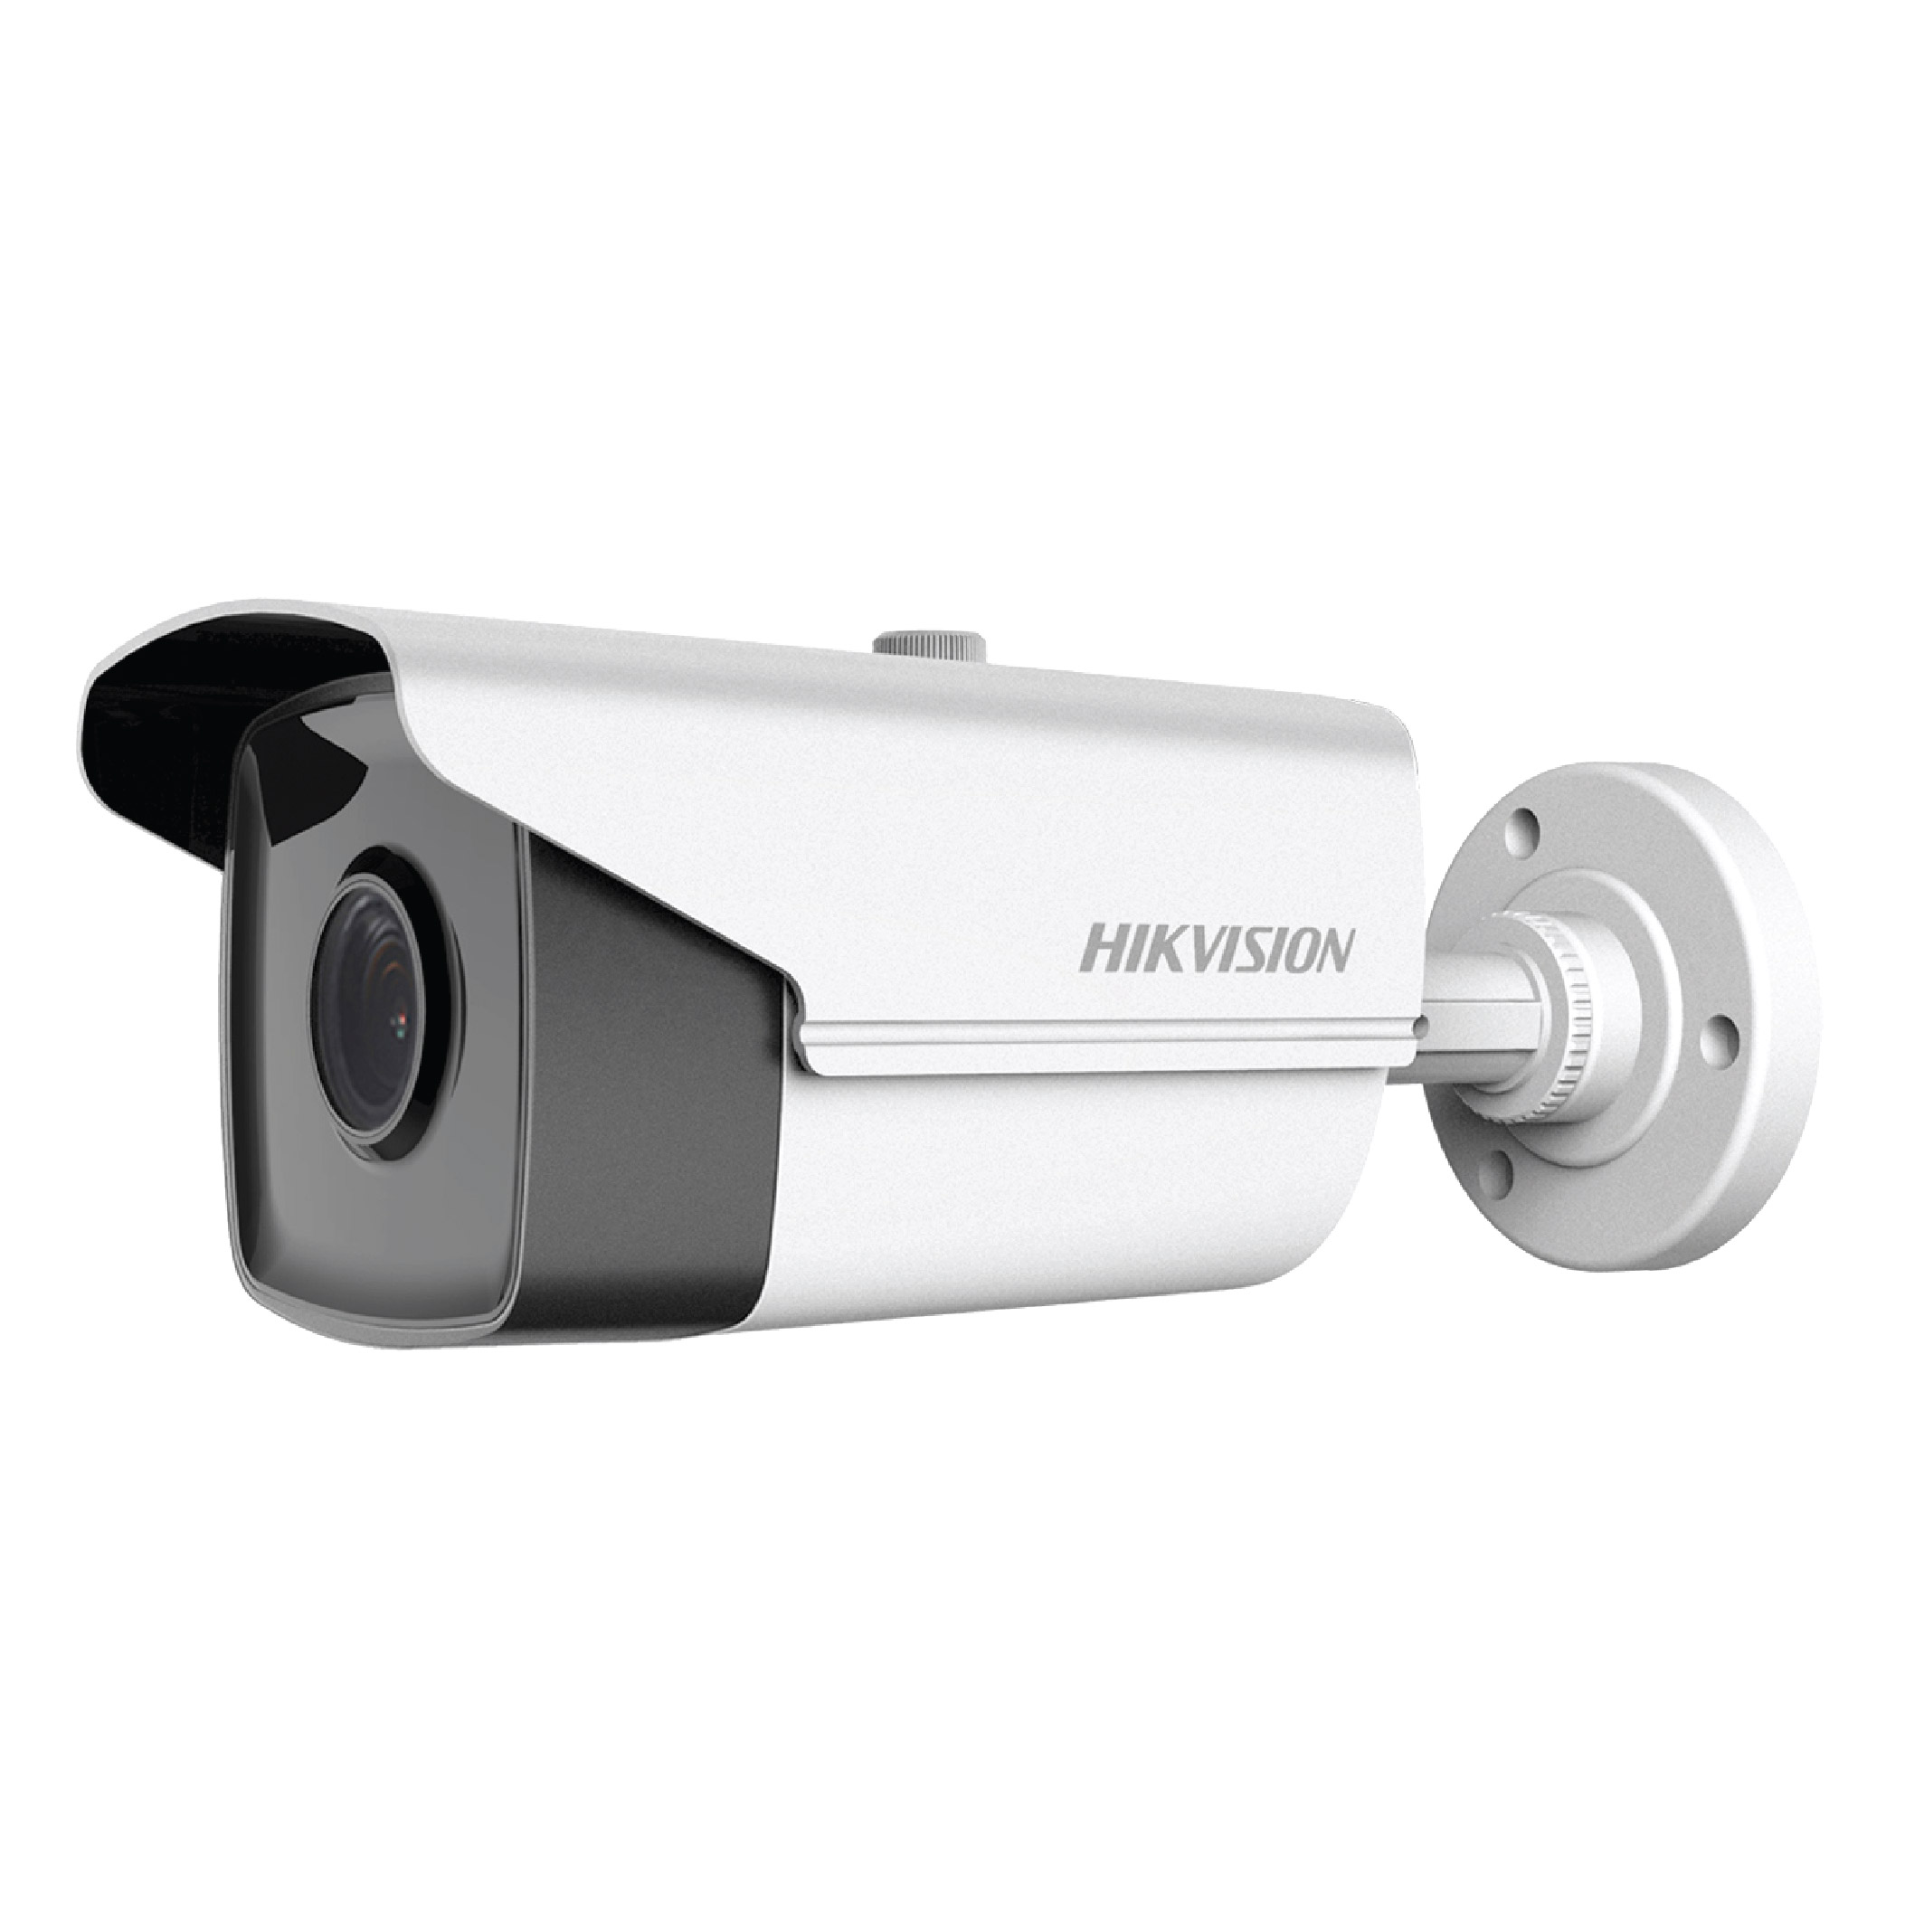 HIKVISION DS-2CE16D8T-IT1F Turbo HD Camera